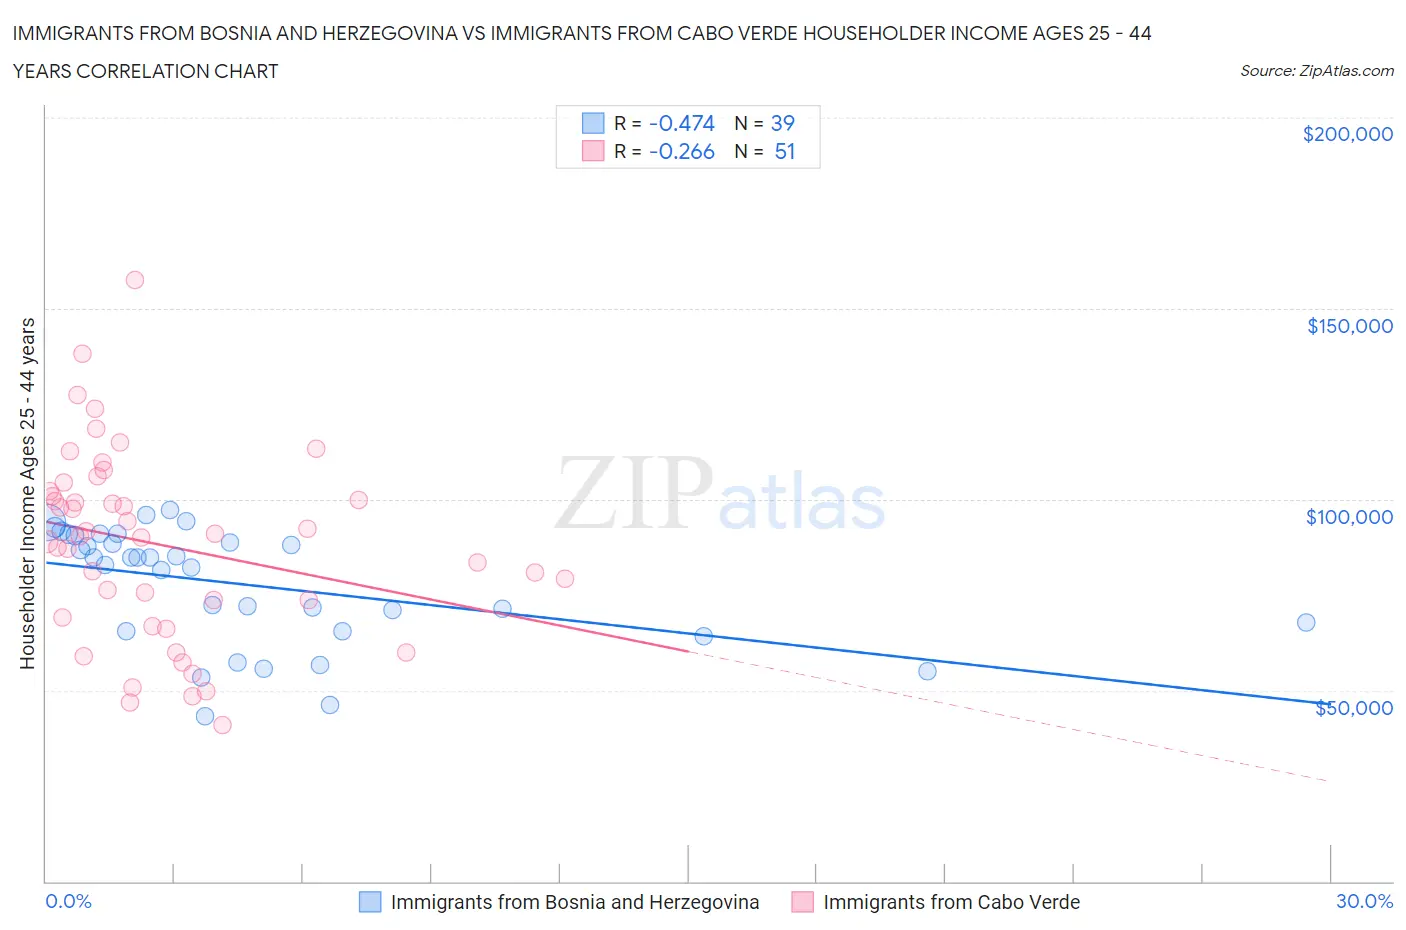 Immigrants from Bosnia and Herzegovina vs Immigrants from Cabo Verde Householder Income Ages 25 - 44 years